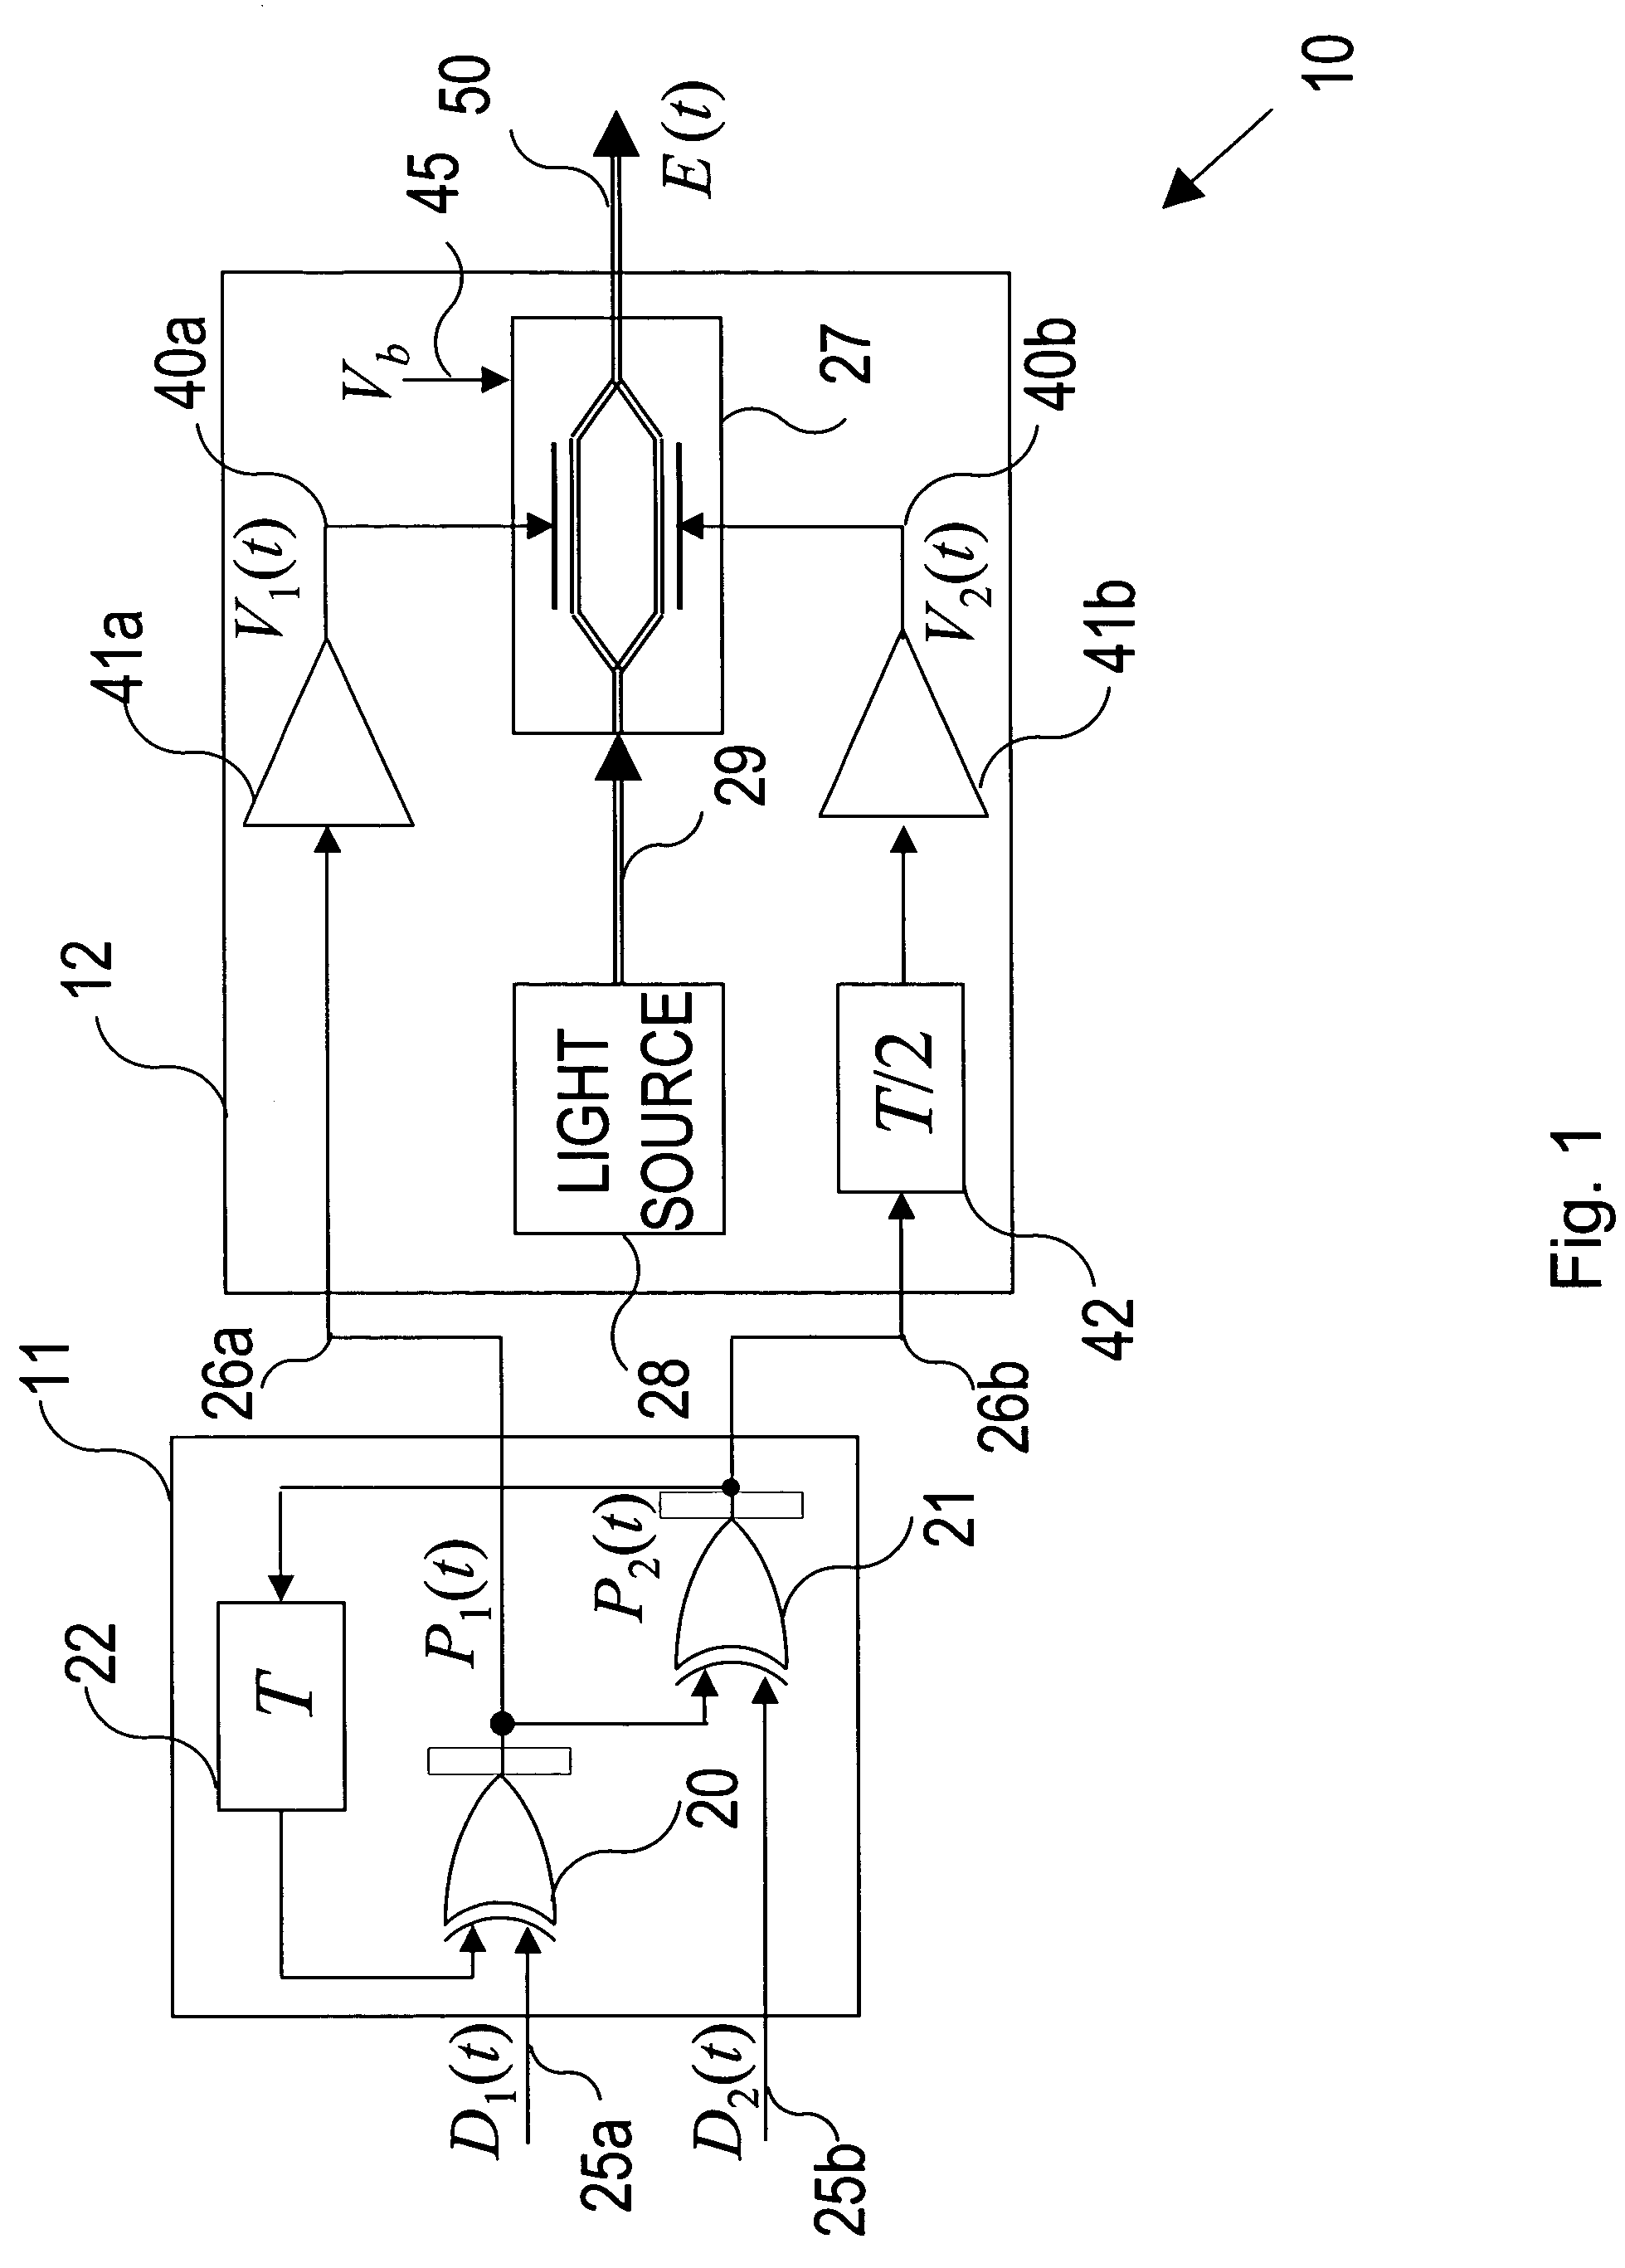 Half rate precoded data RZ transmitter